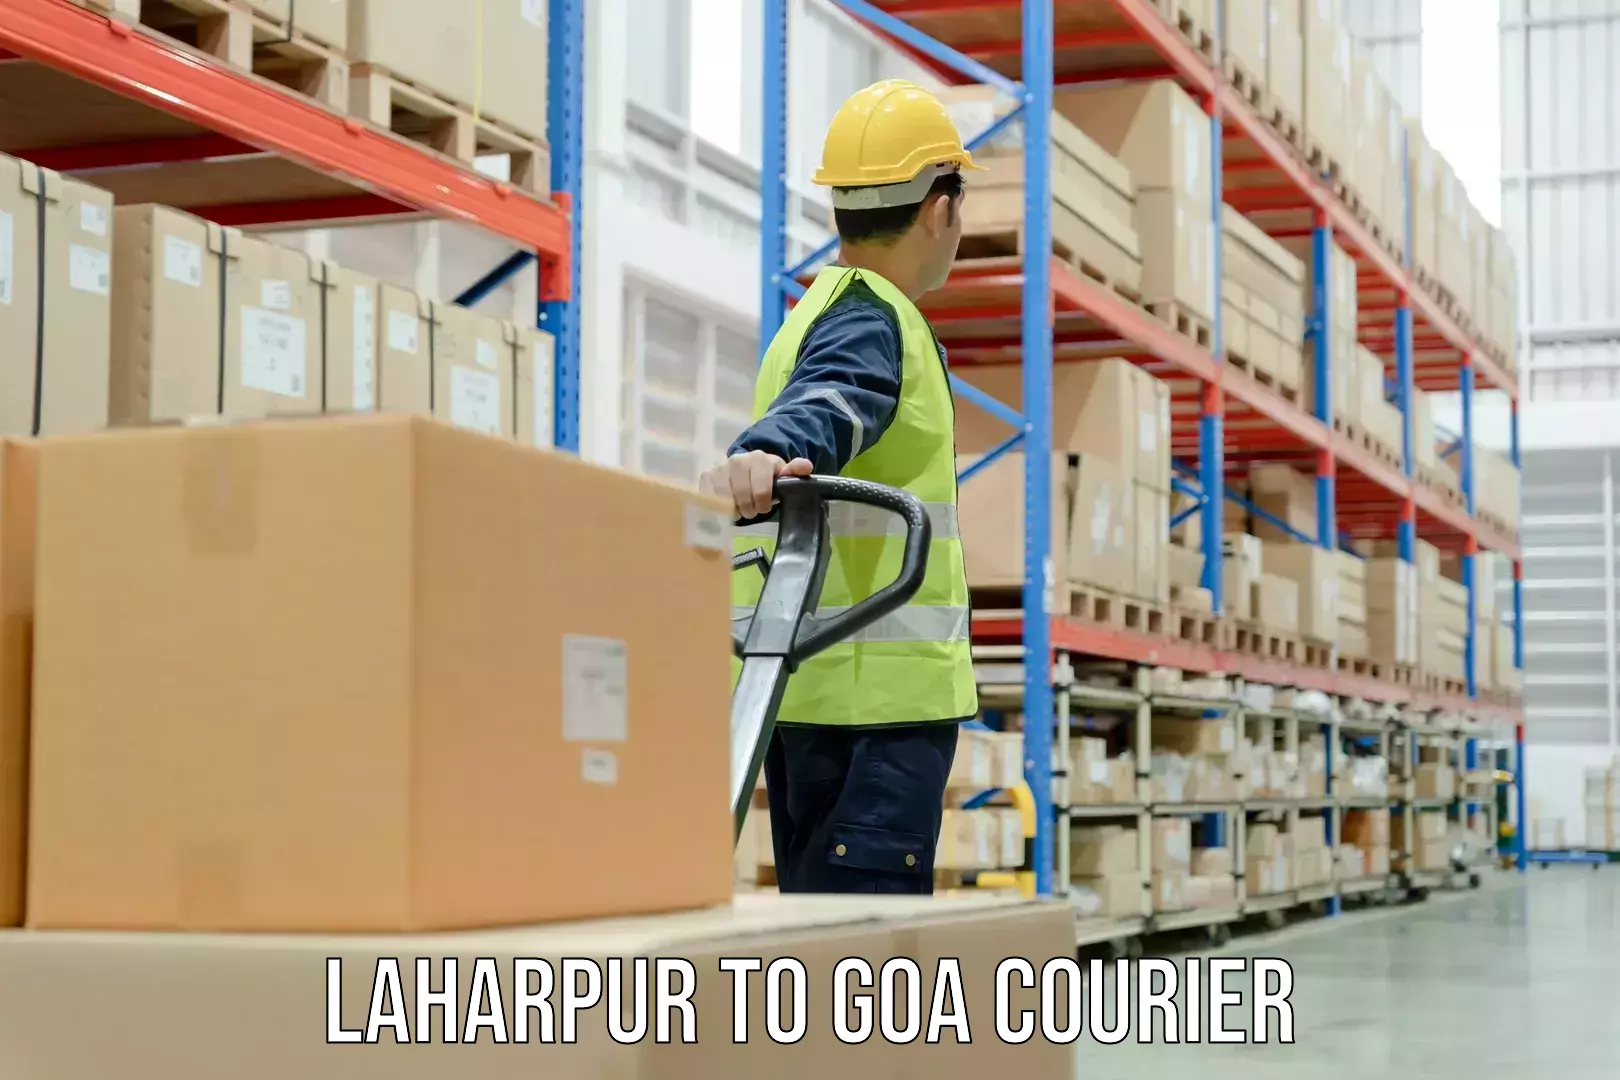 Sustainable shipping practices Laharpur to Goa